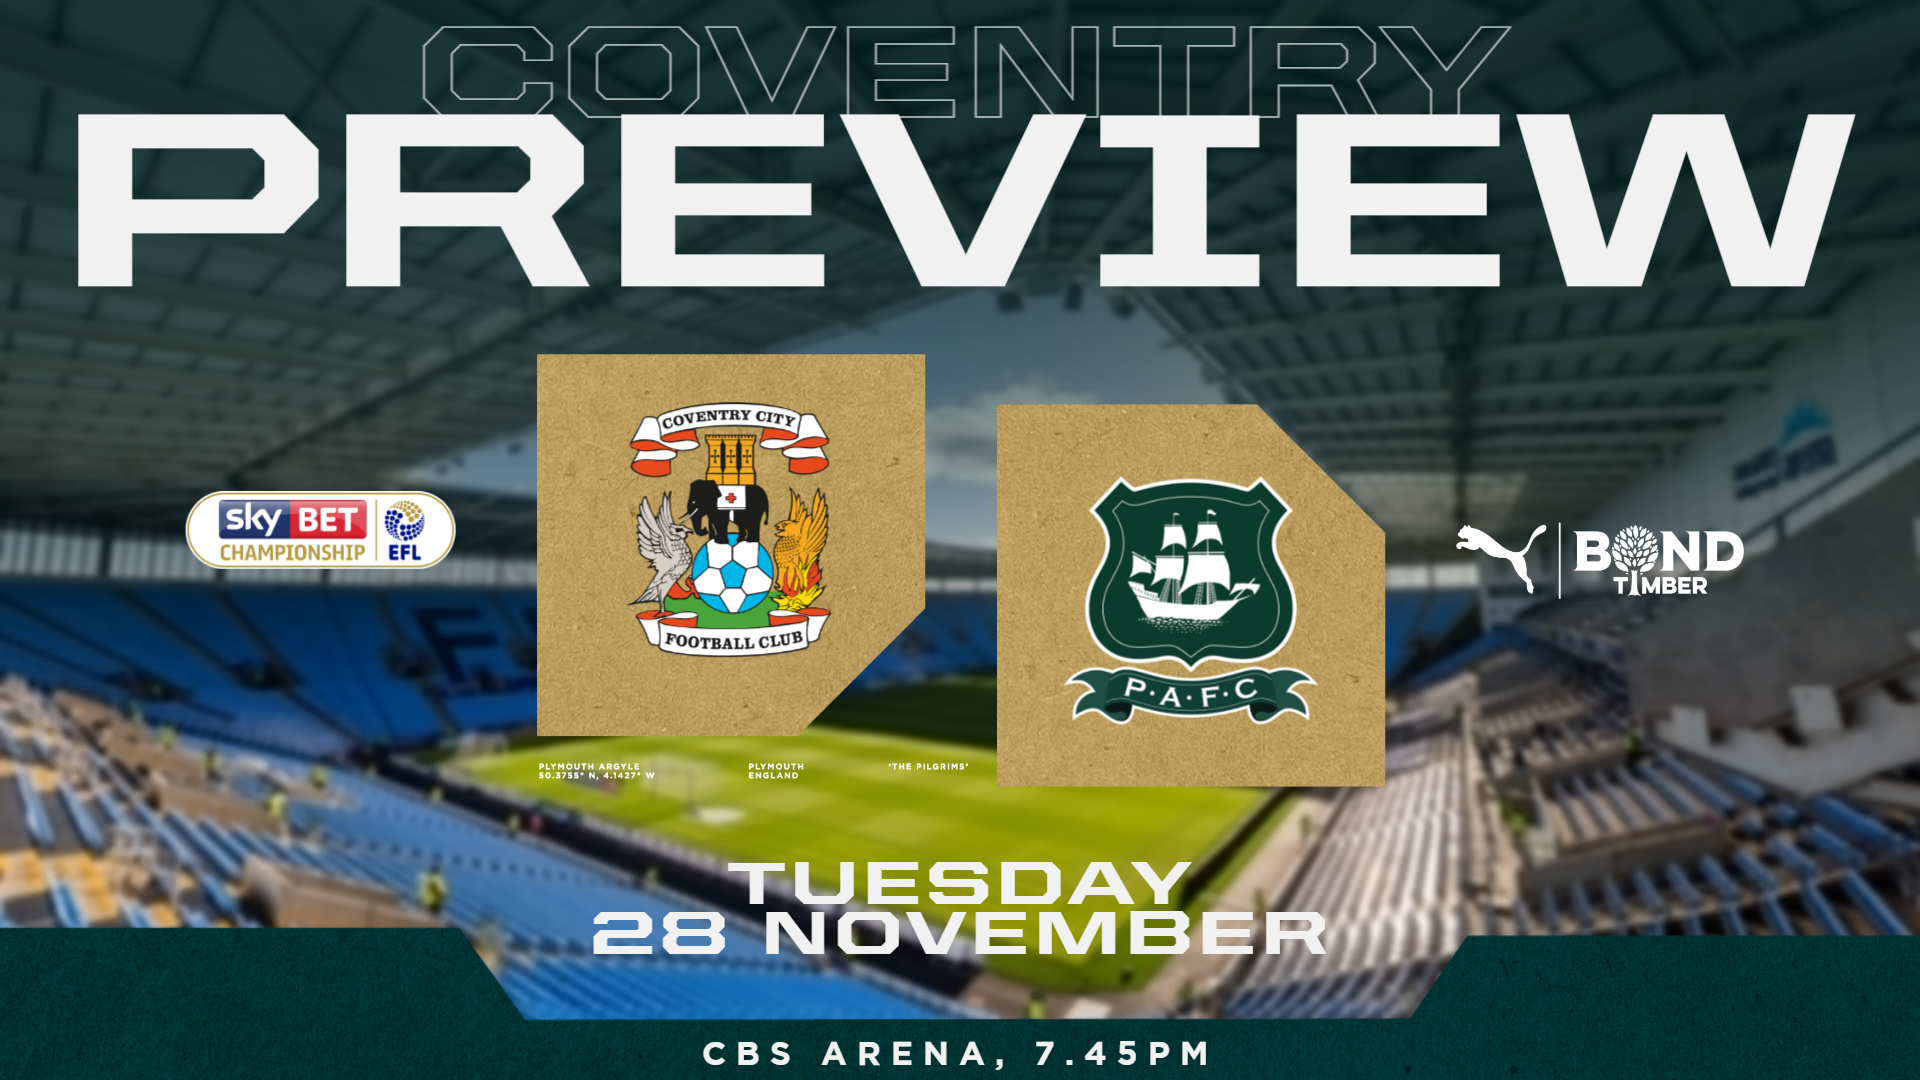 Coventry Match preview